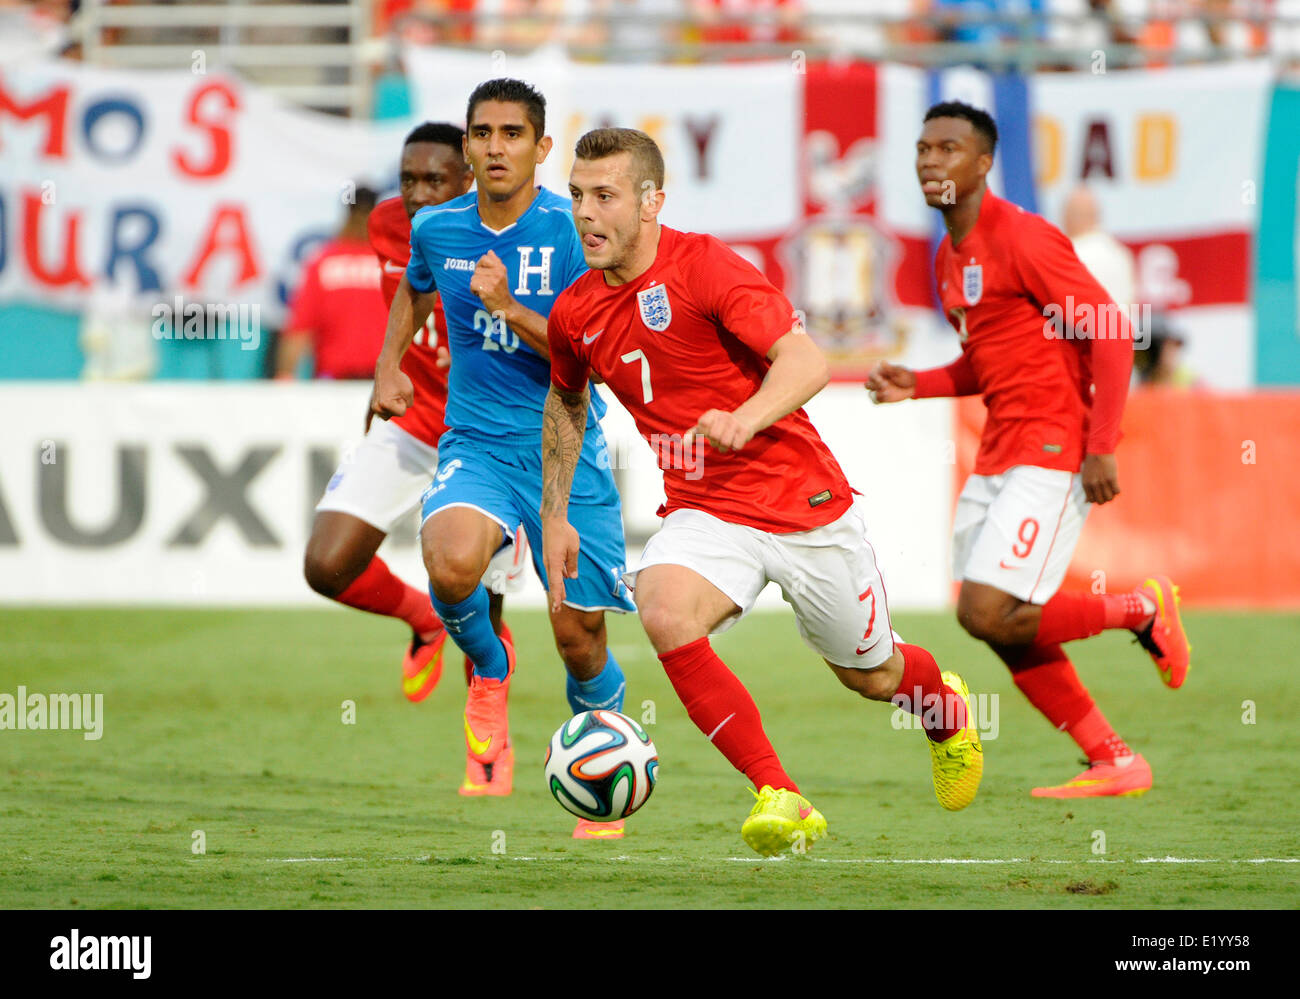 Florida, USA. 7th June, 2014. England Midfielder Jack Wilshere (7) controls the ball challenged by Honduras Midfielder Jorge Claros (20) and England Forward Daniel Sturridge (9) during an international friendly world cup warm up soccer match between England and Honduras at the Sun Life Stadium in Miami Gardens, Florida. © Action Plus Sports/Alamy Live News Stock Photo